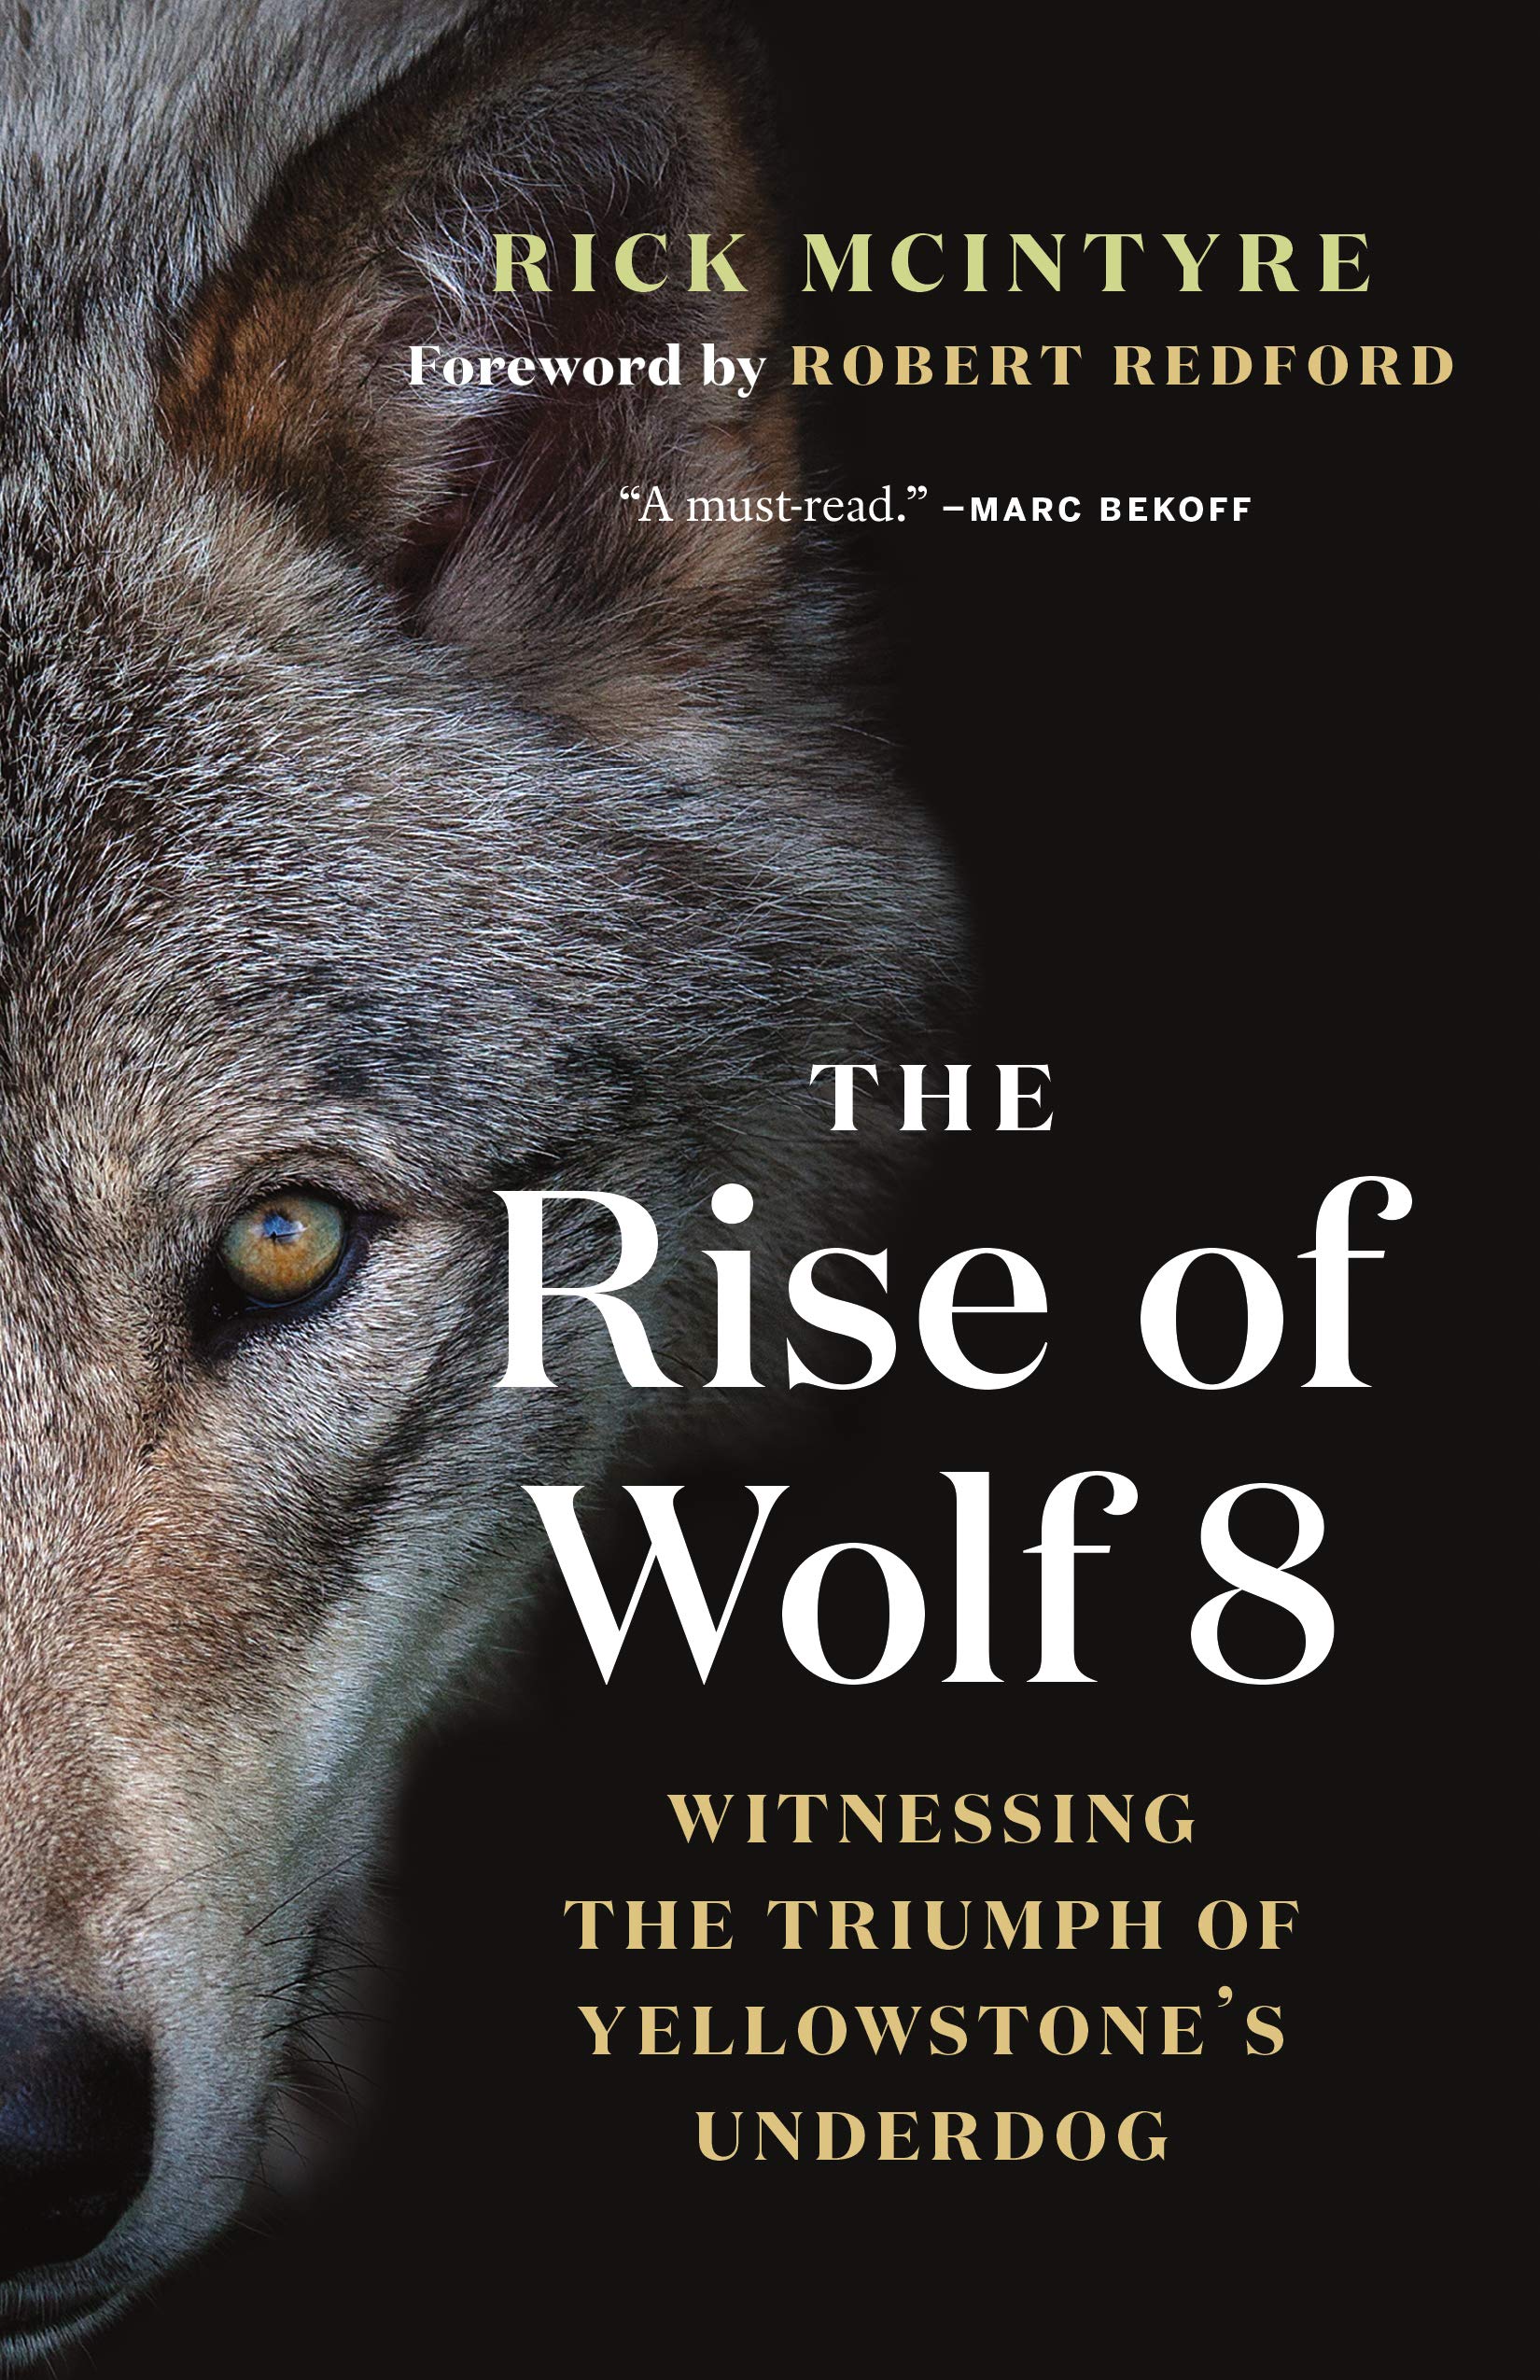 Book cover art: Half of a wolf's fact, covering the left half of the cover.  The title of the book is in the center.